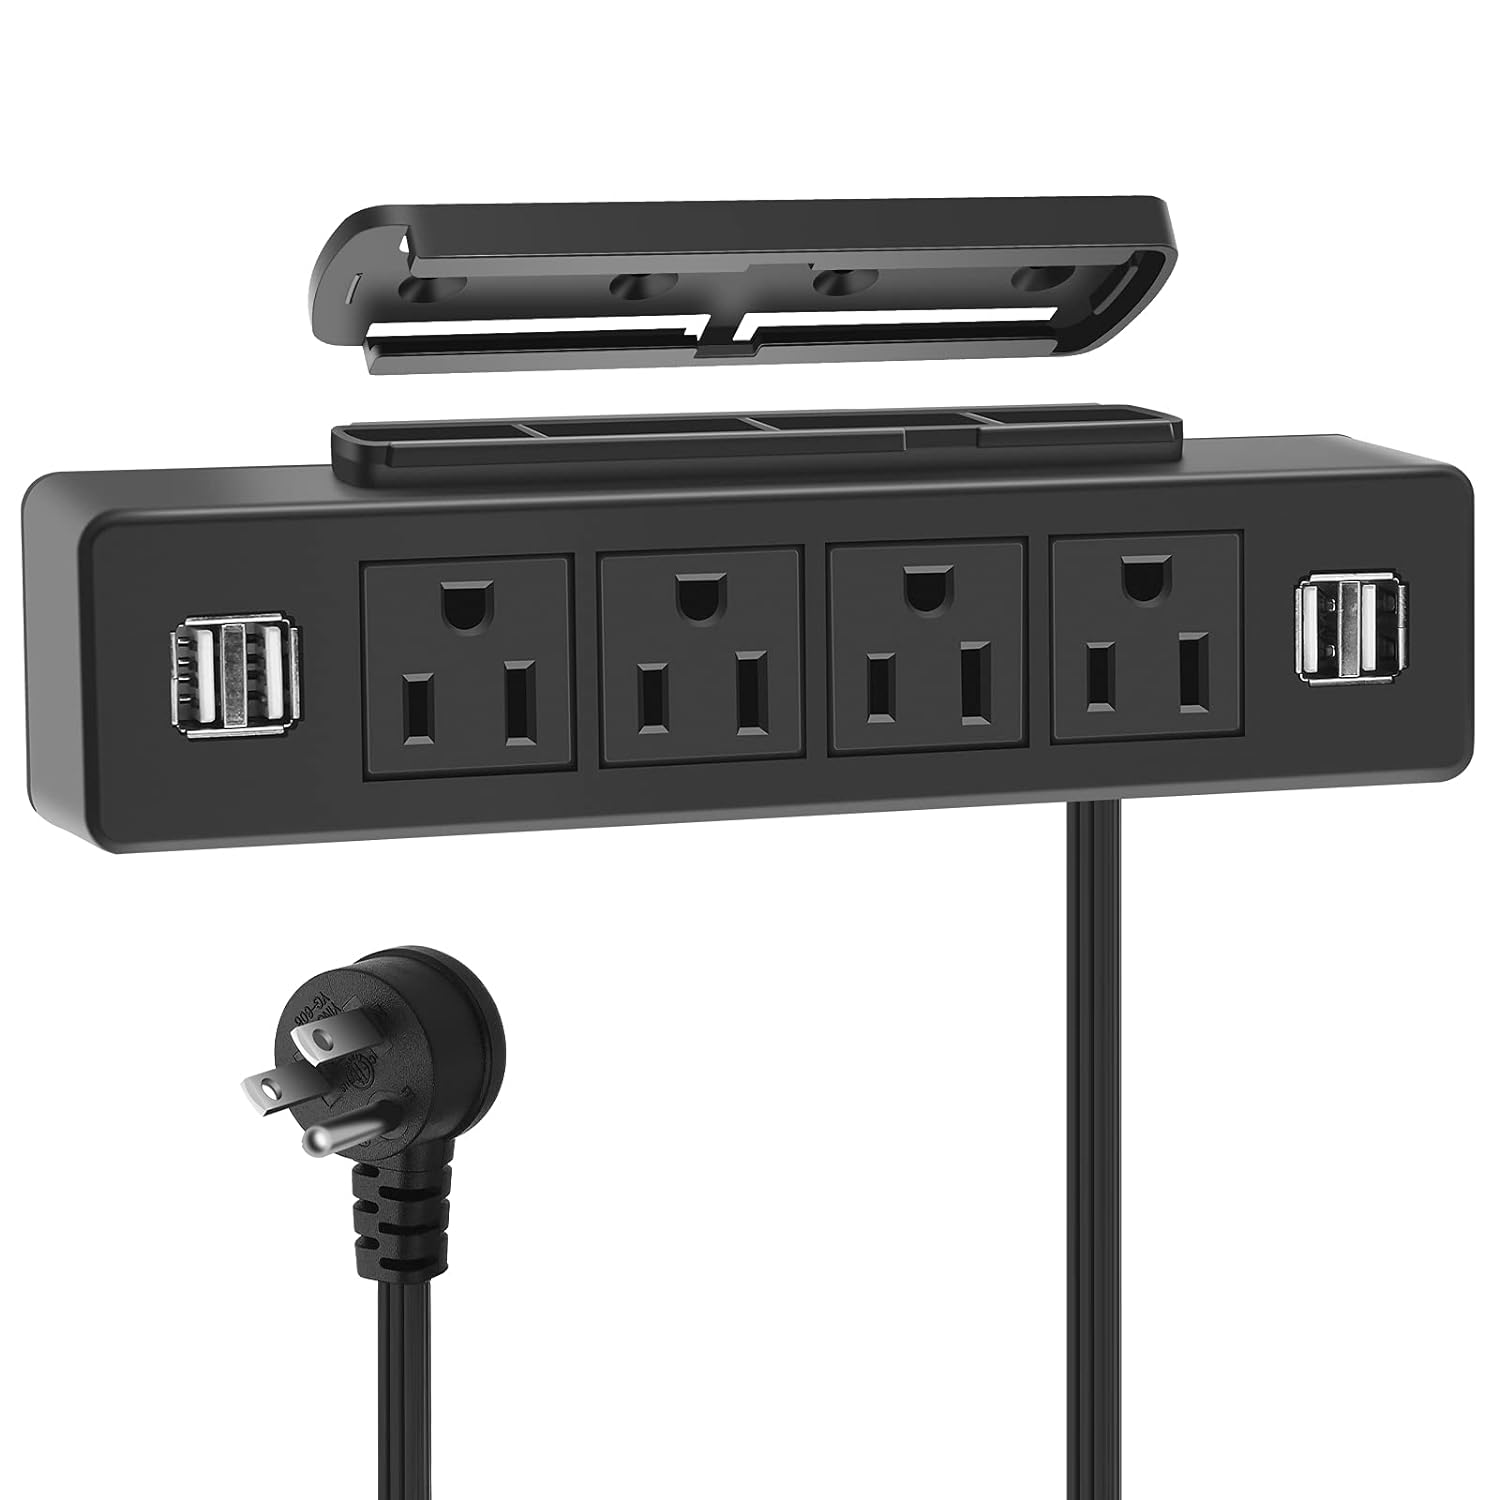 Great Choice Products Under Desk Power Strip, Adhesive Wall Mount With Usb, Black Desktop Power Outlets, Removable Mount Multi-Outlets With 4 Us…